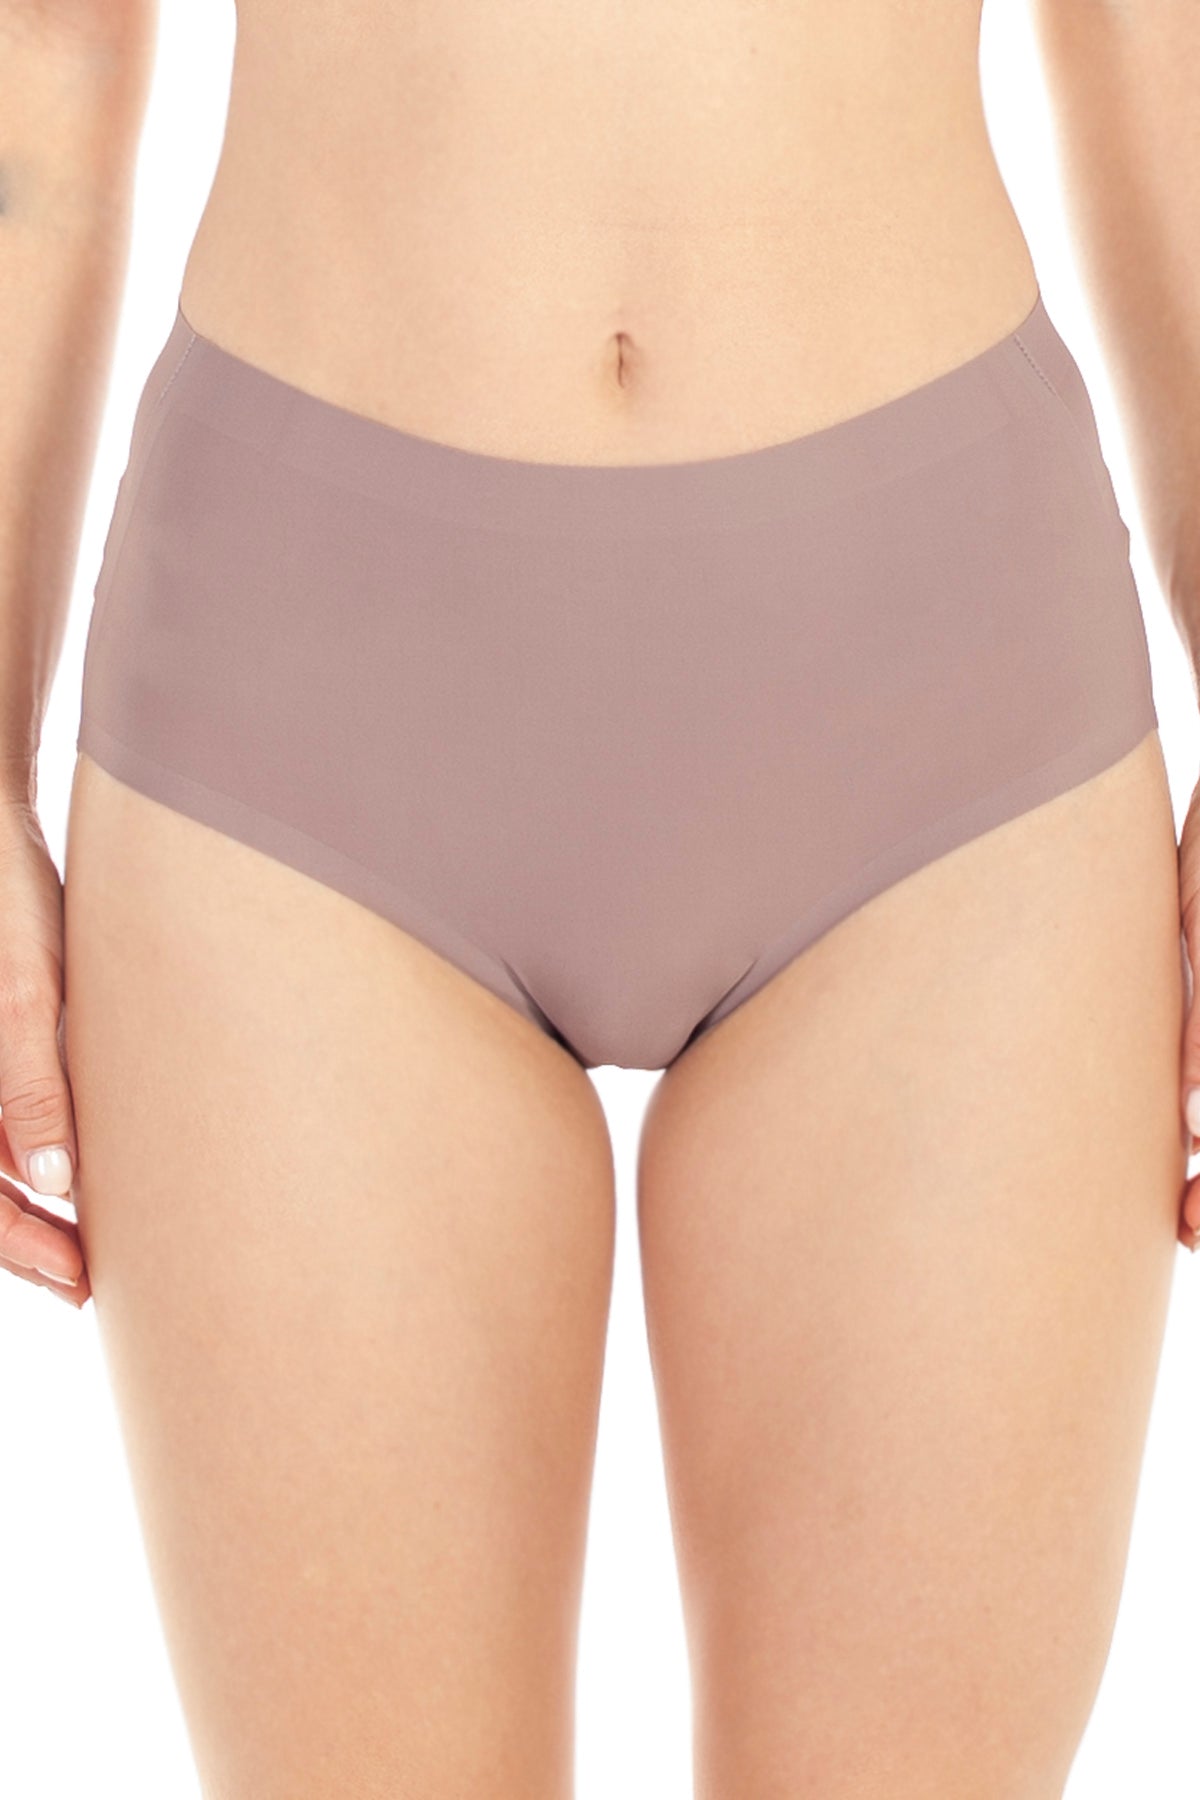 Wholesale antibacterial underwear In Sexy And Comfortable Styles 